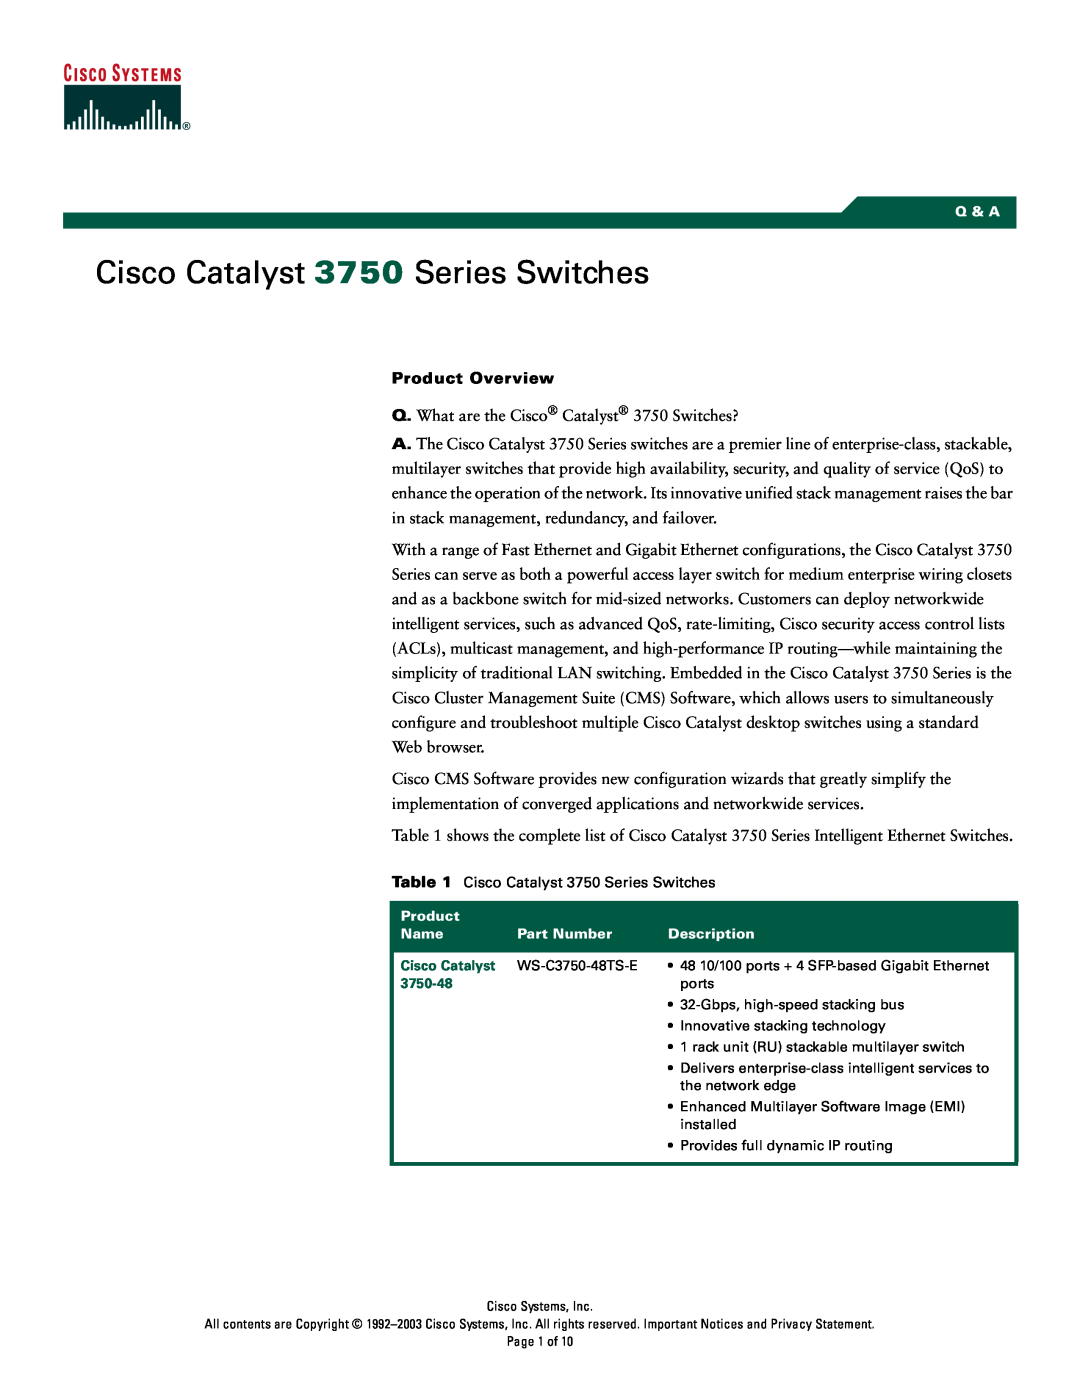 Cisco Systems manual Product Overview, Cisco Catalyst 3750 Series Switches 